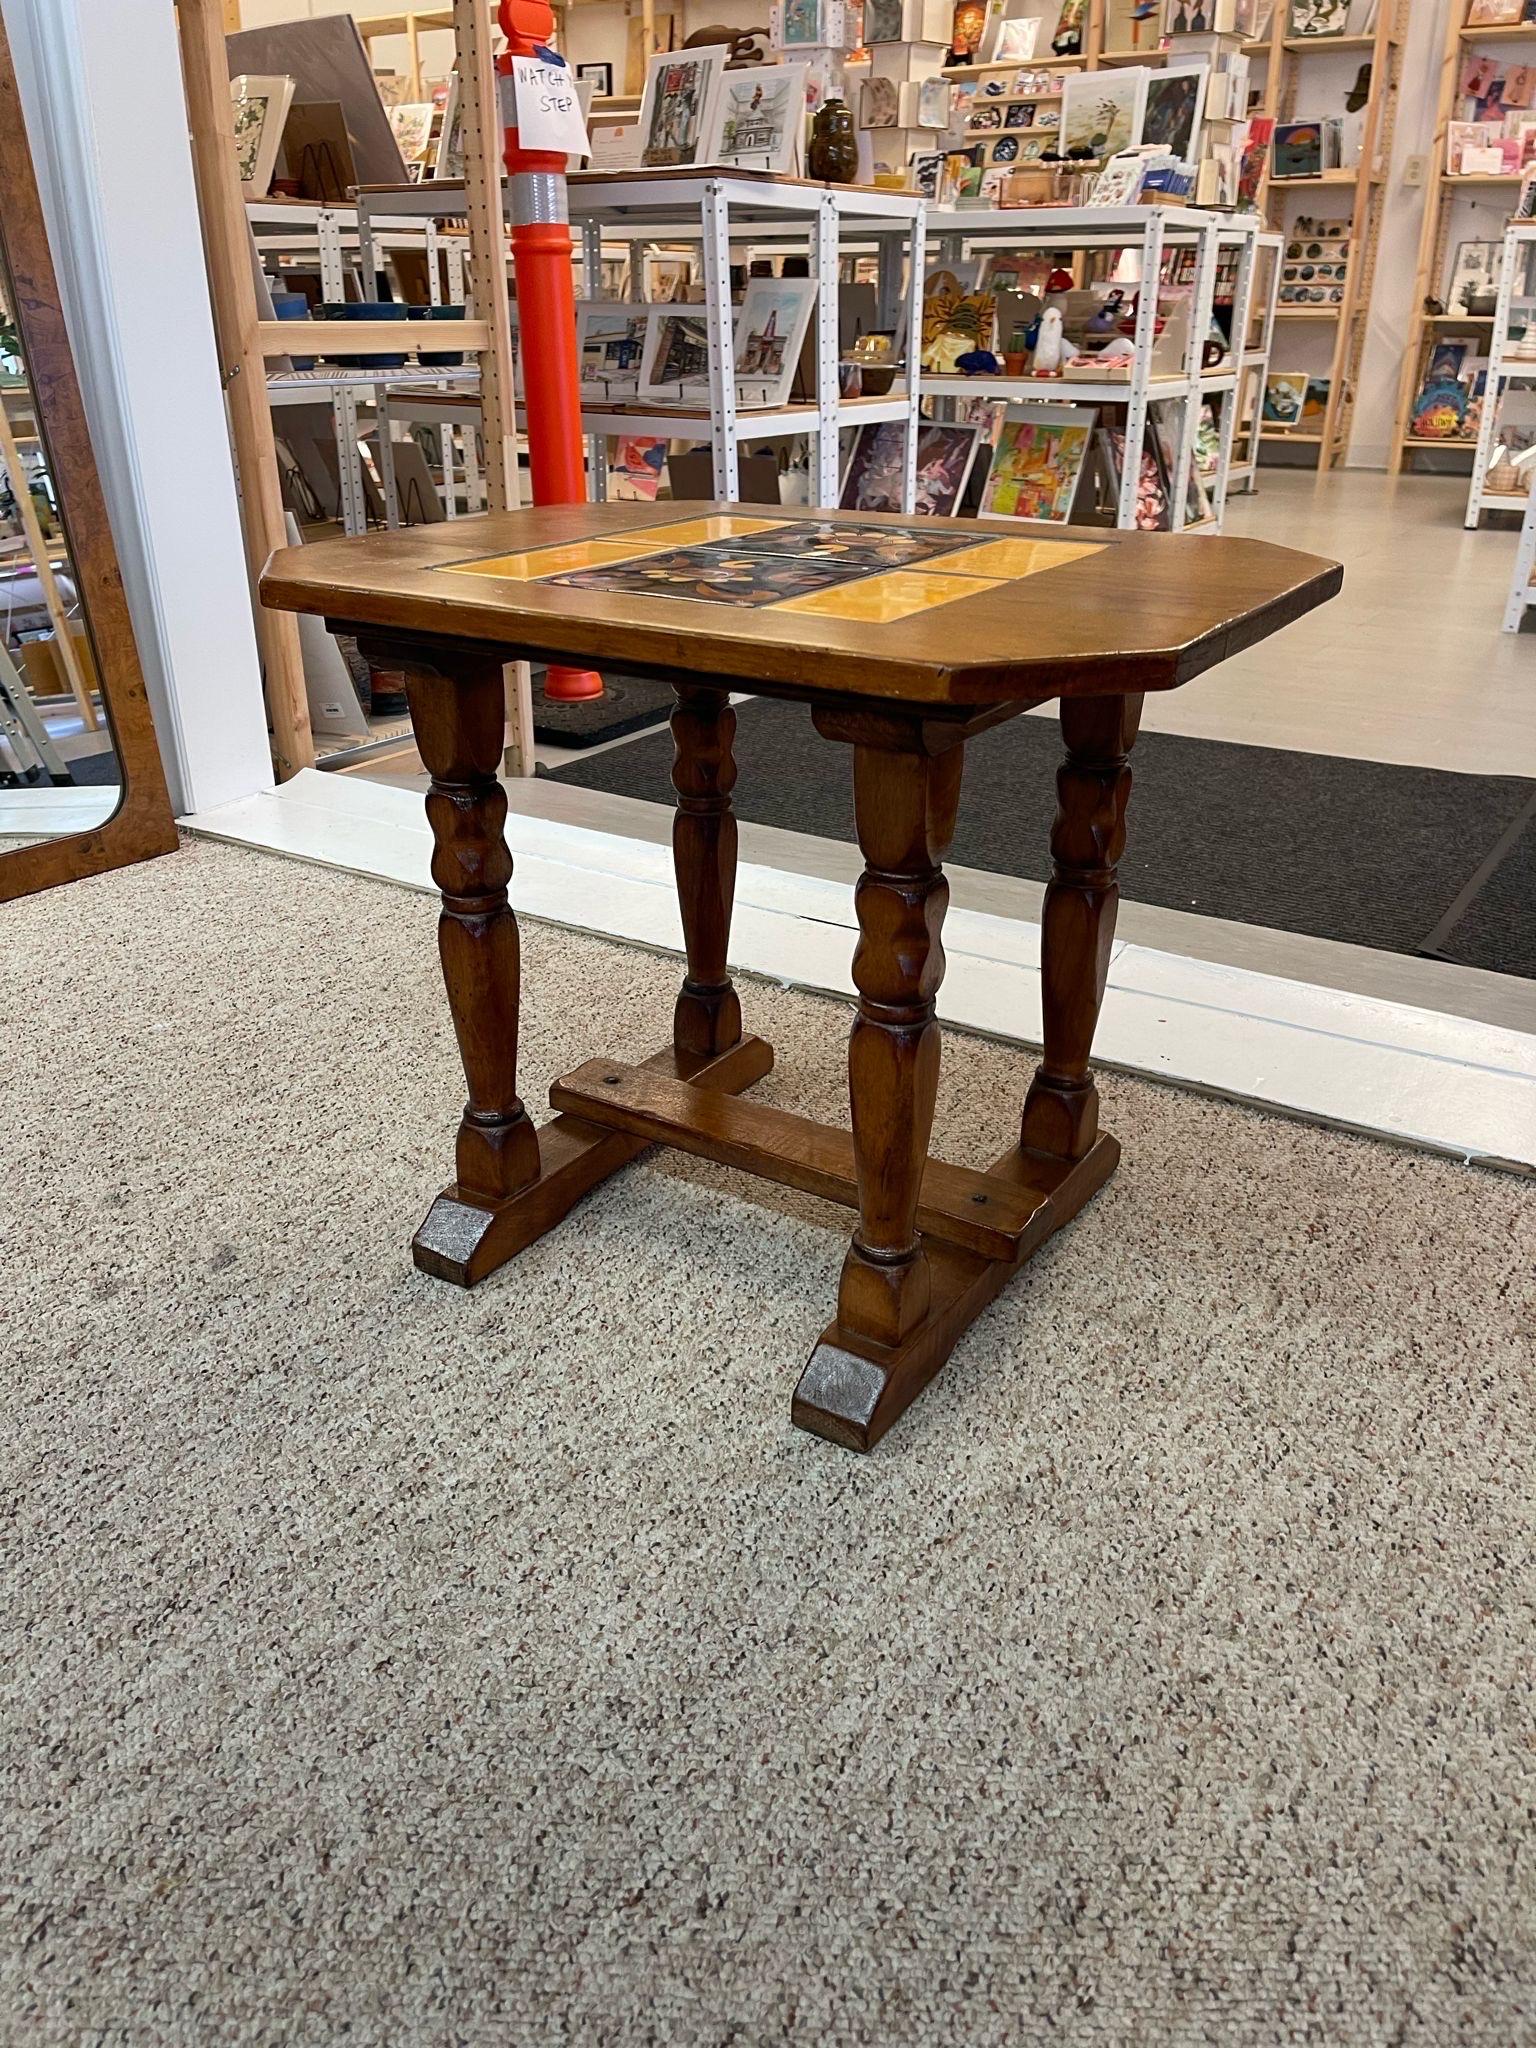 Vintage Catalina Style Accent Table with 6 Yellow and Black Colored Tiles. Turned Legs with stretcher. Makers Mark on the Bottom. Vintage Condition Consistent with Age as Pictured.

Dimensions. 24 W ; 18 D ; 29 H